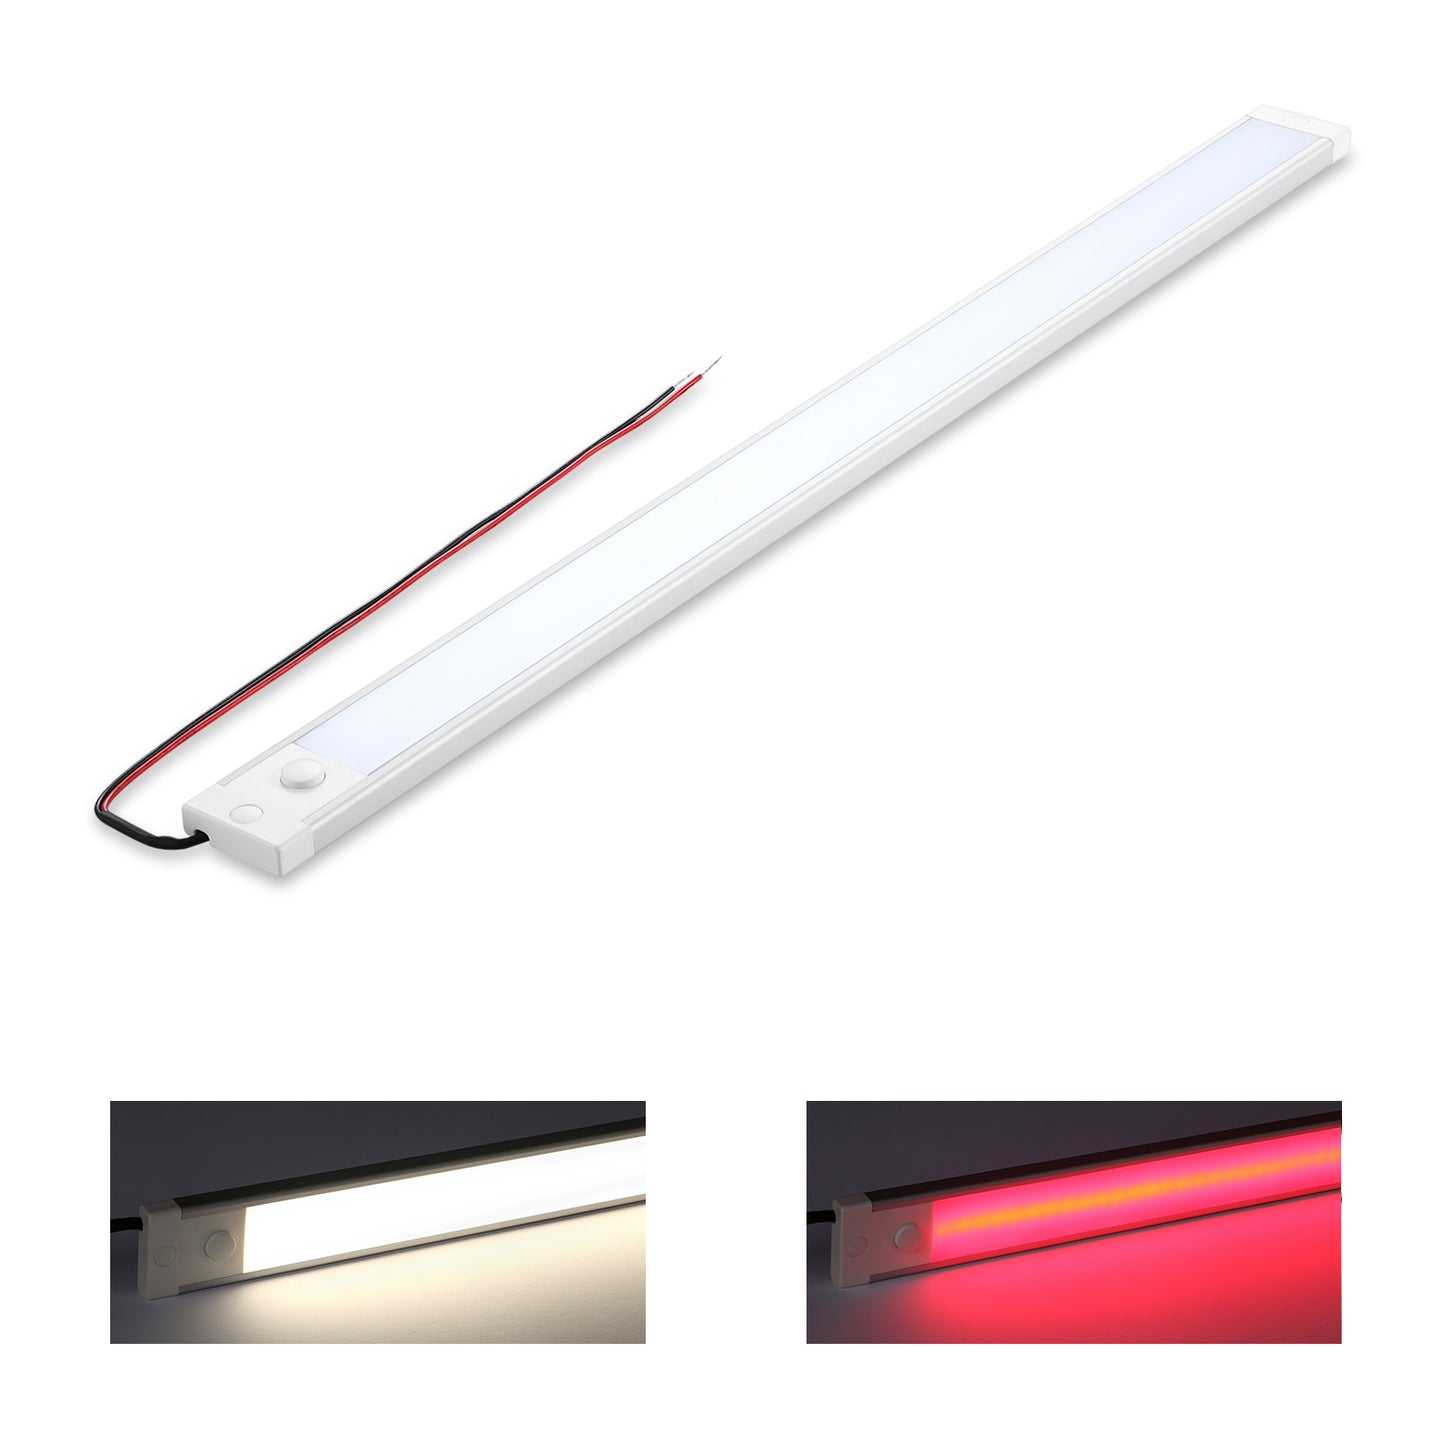 12V RV Boat Dimmable Under Cabinet LED Lighting Linear Light Bar with Integral Dimming Switch & Red Light, Screw Mount Hard-wired CRI90+ 20 Inches